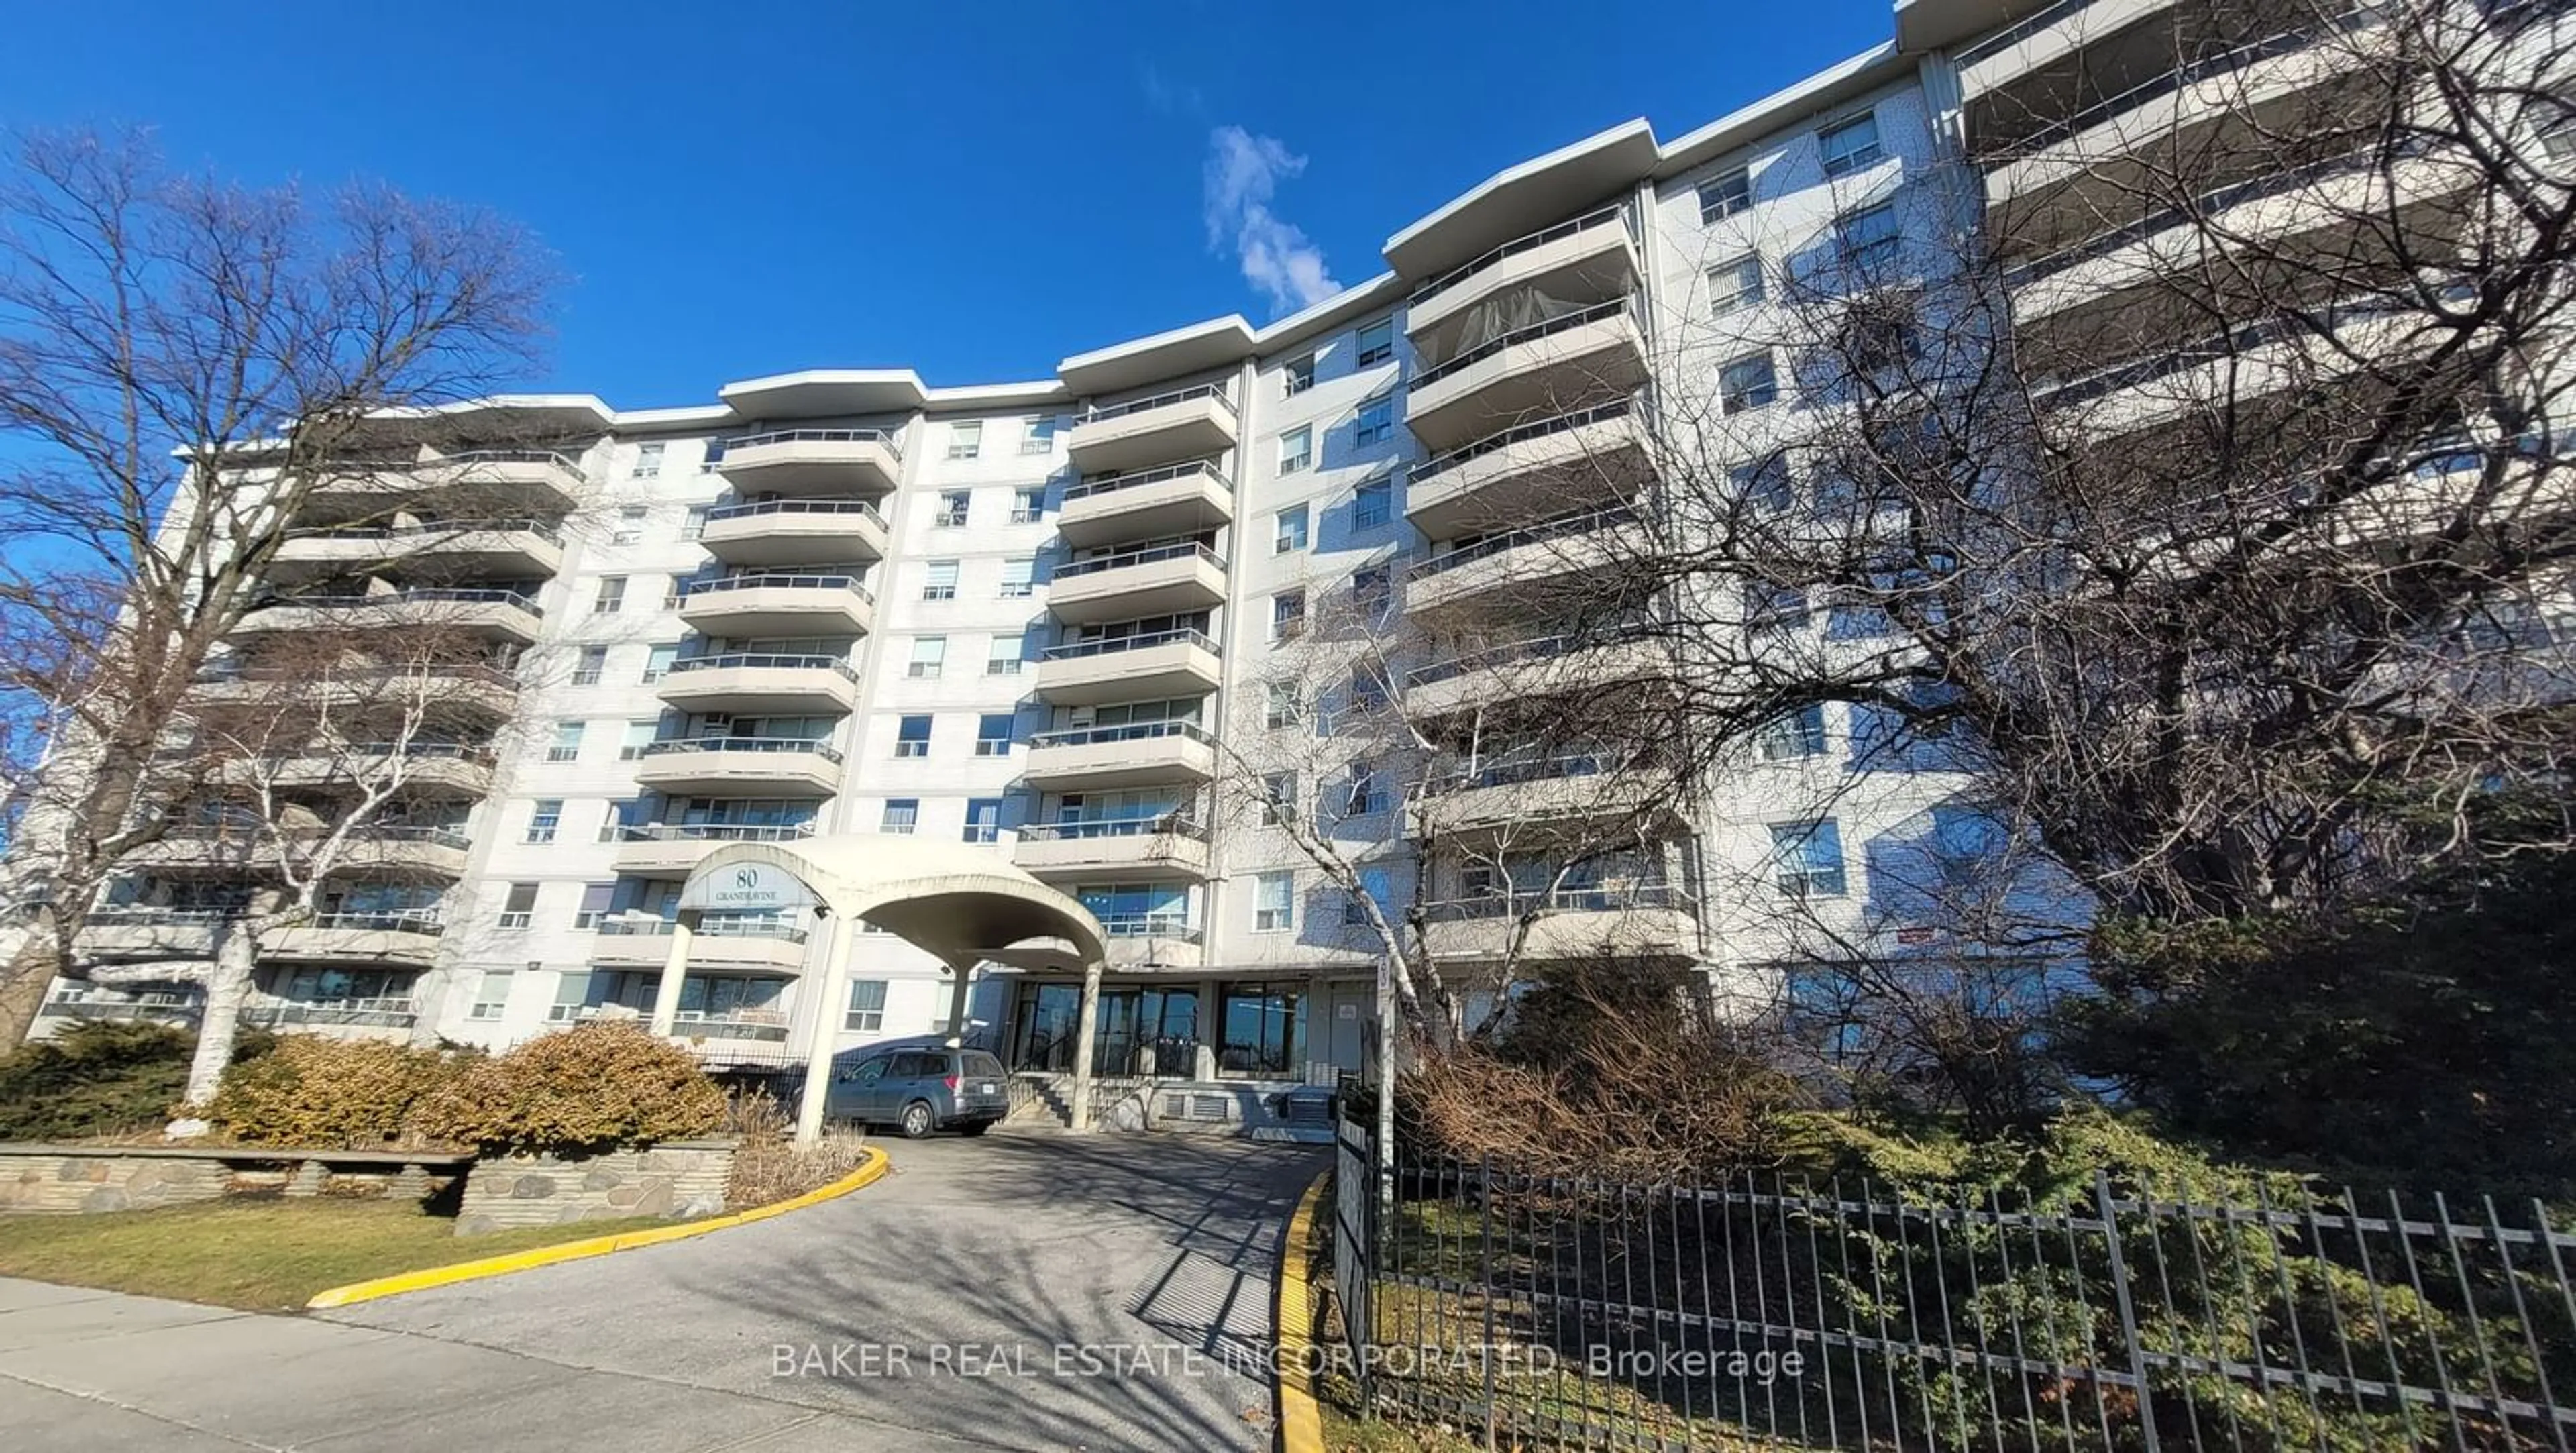 A pic from exterior of the house or condo for 80 Grandravine Dr #214, Toronto Ontario M3J 1B2